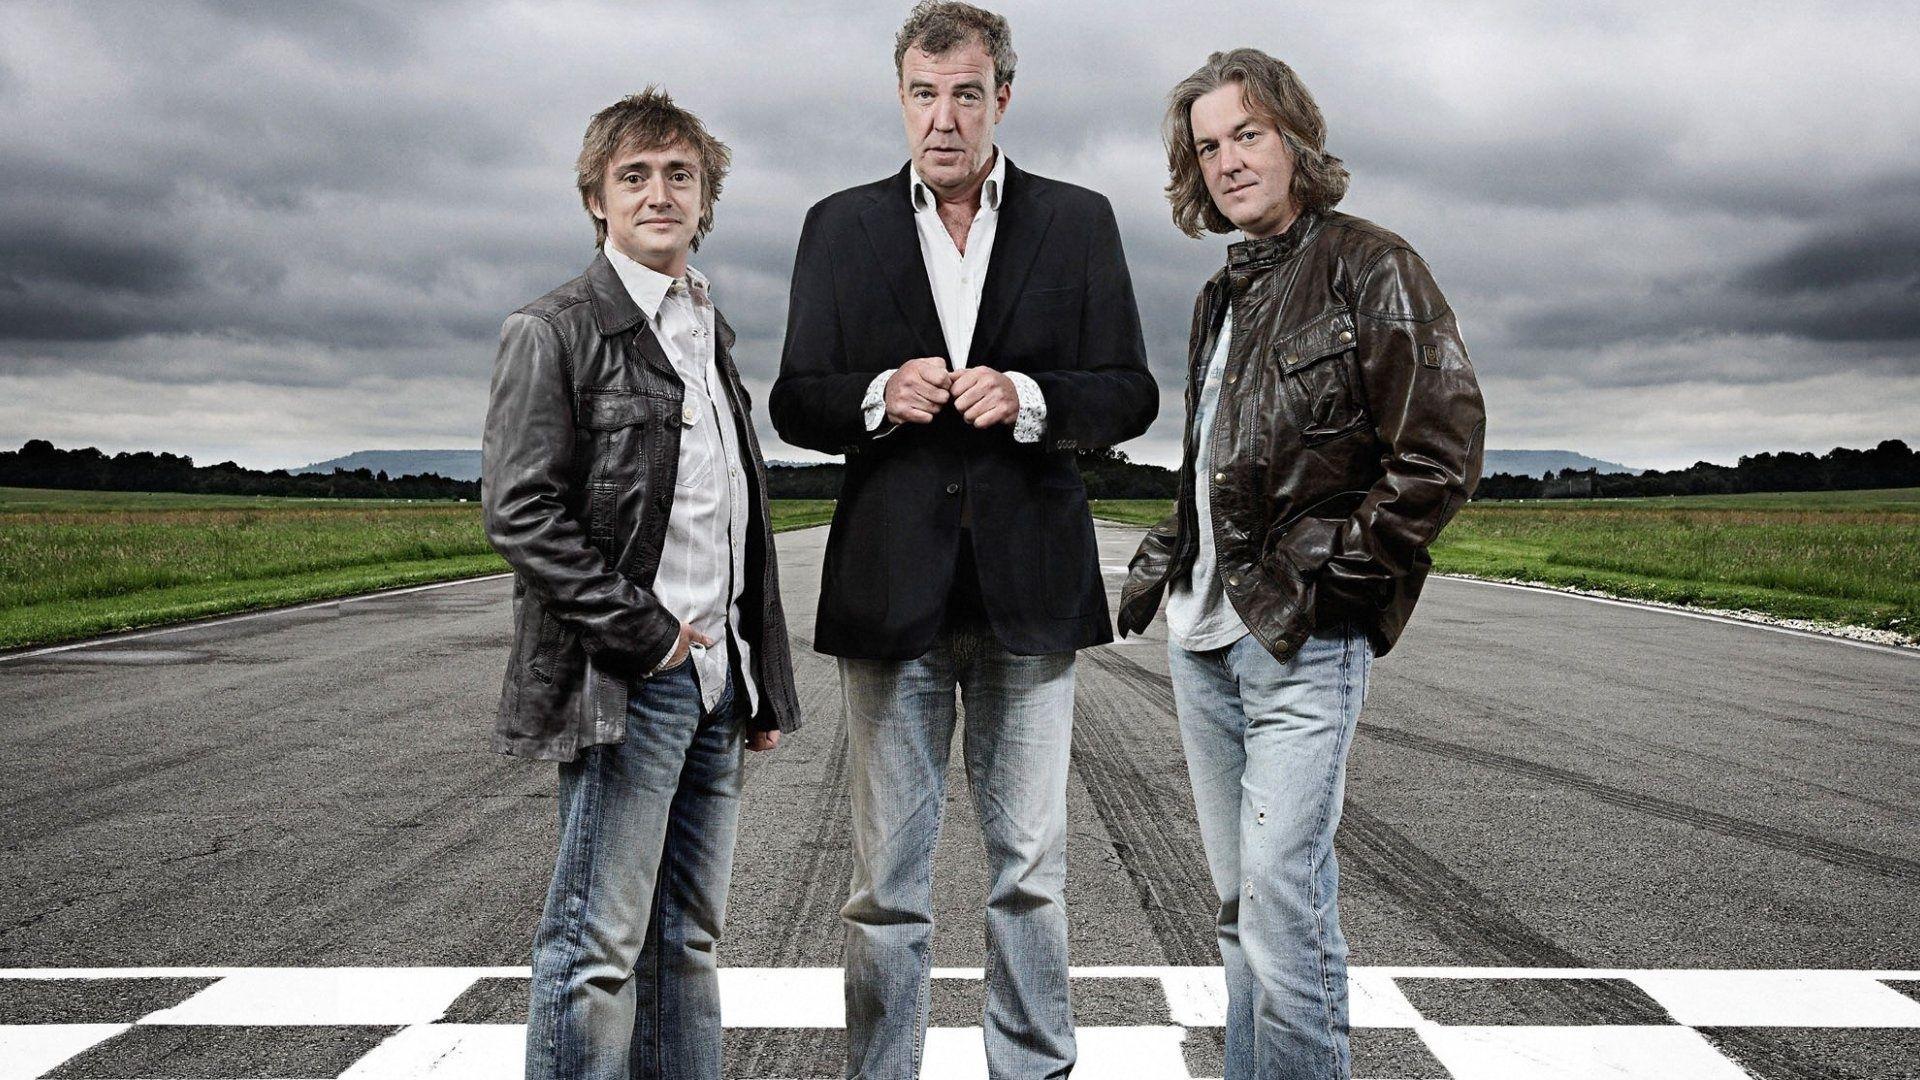 image For > Top Gear Wallpaper 1920x1080